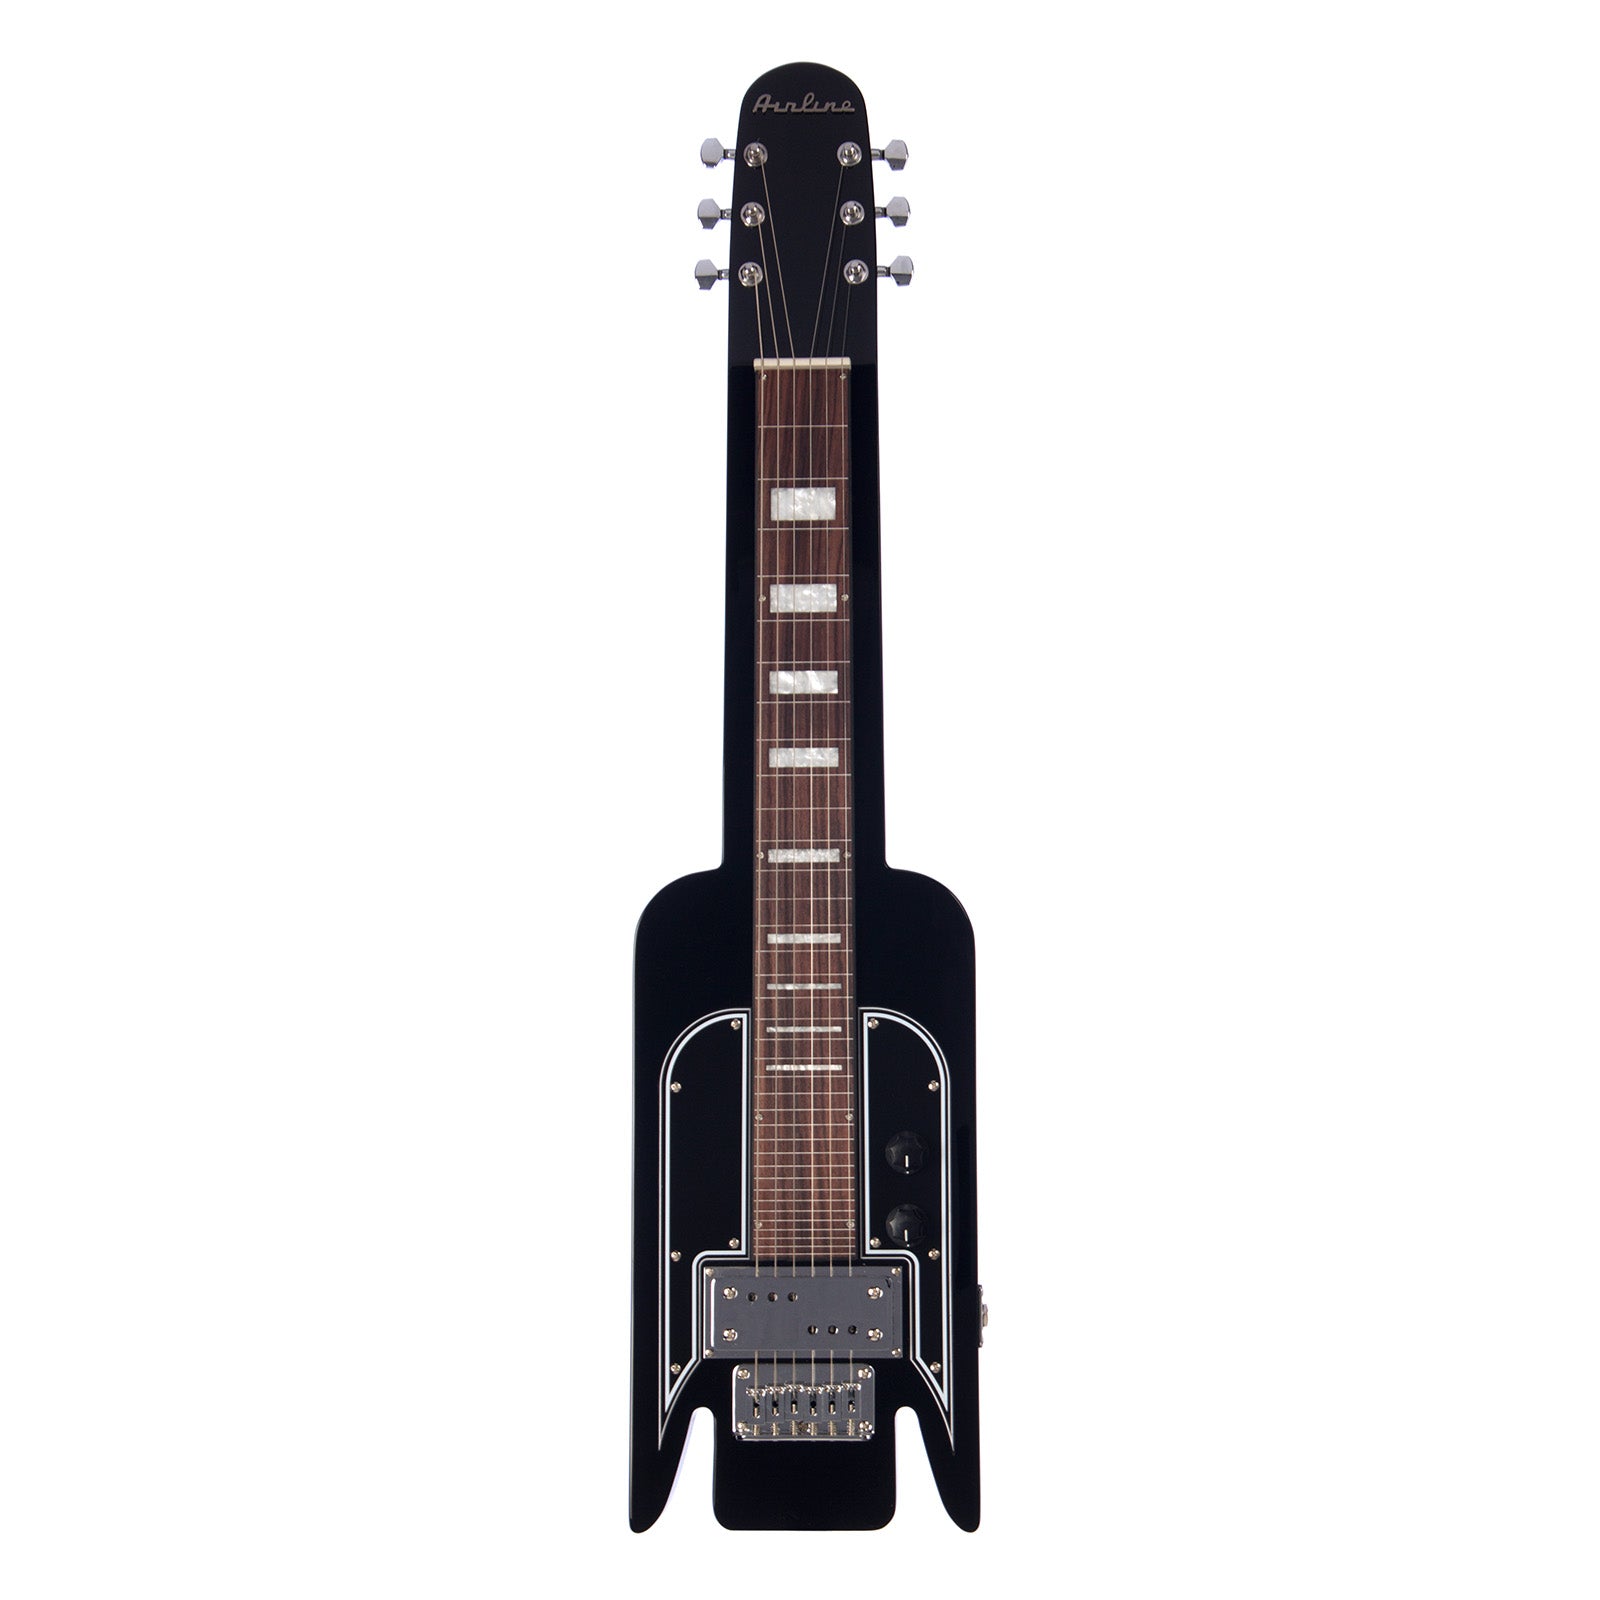 Airline Guitars Lap Steel Pro - Black - Vintage National-inspired with ...